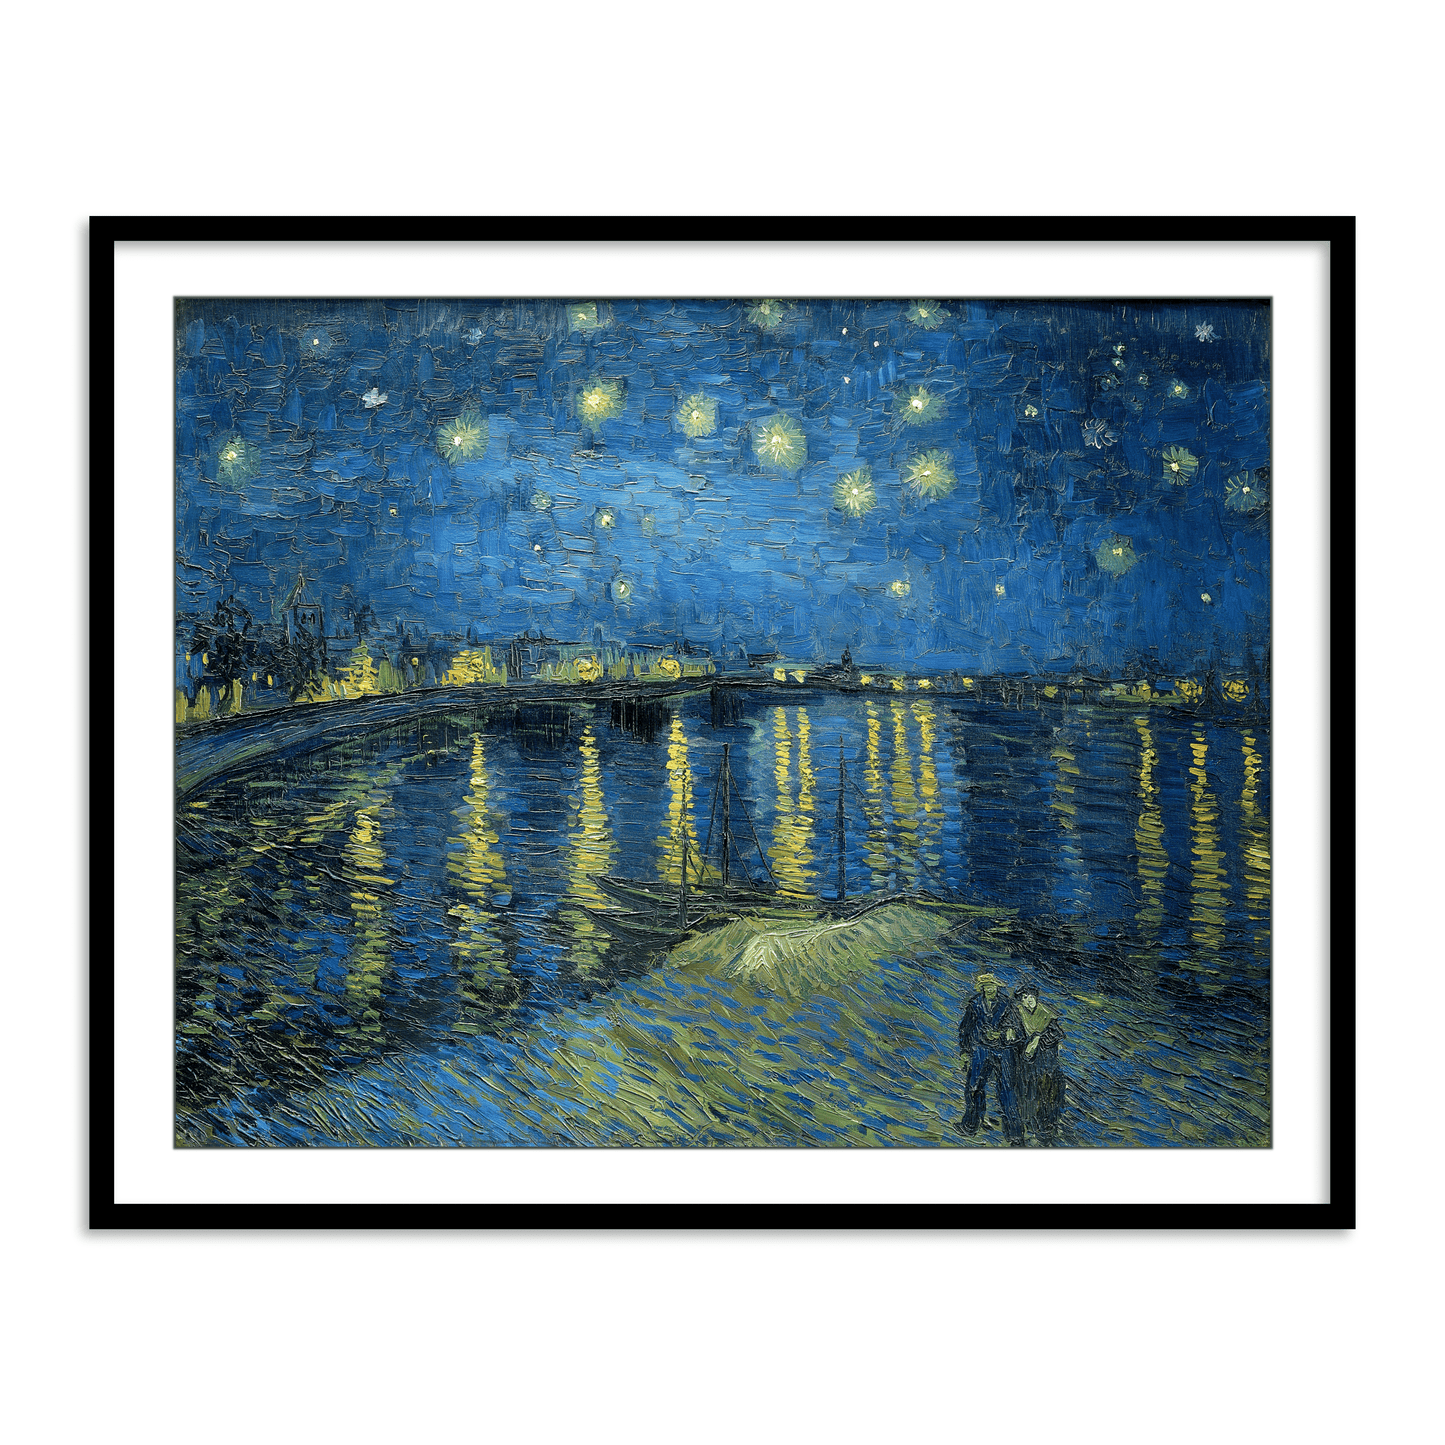 Starry Night Over the Rhone by Vincent Van Gogh Famous Painting Wall Art